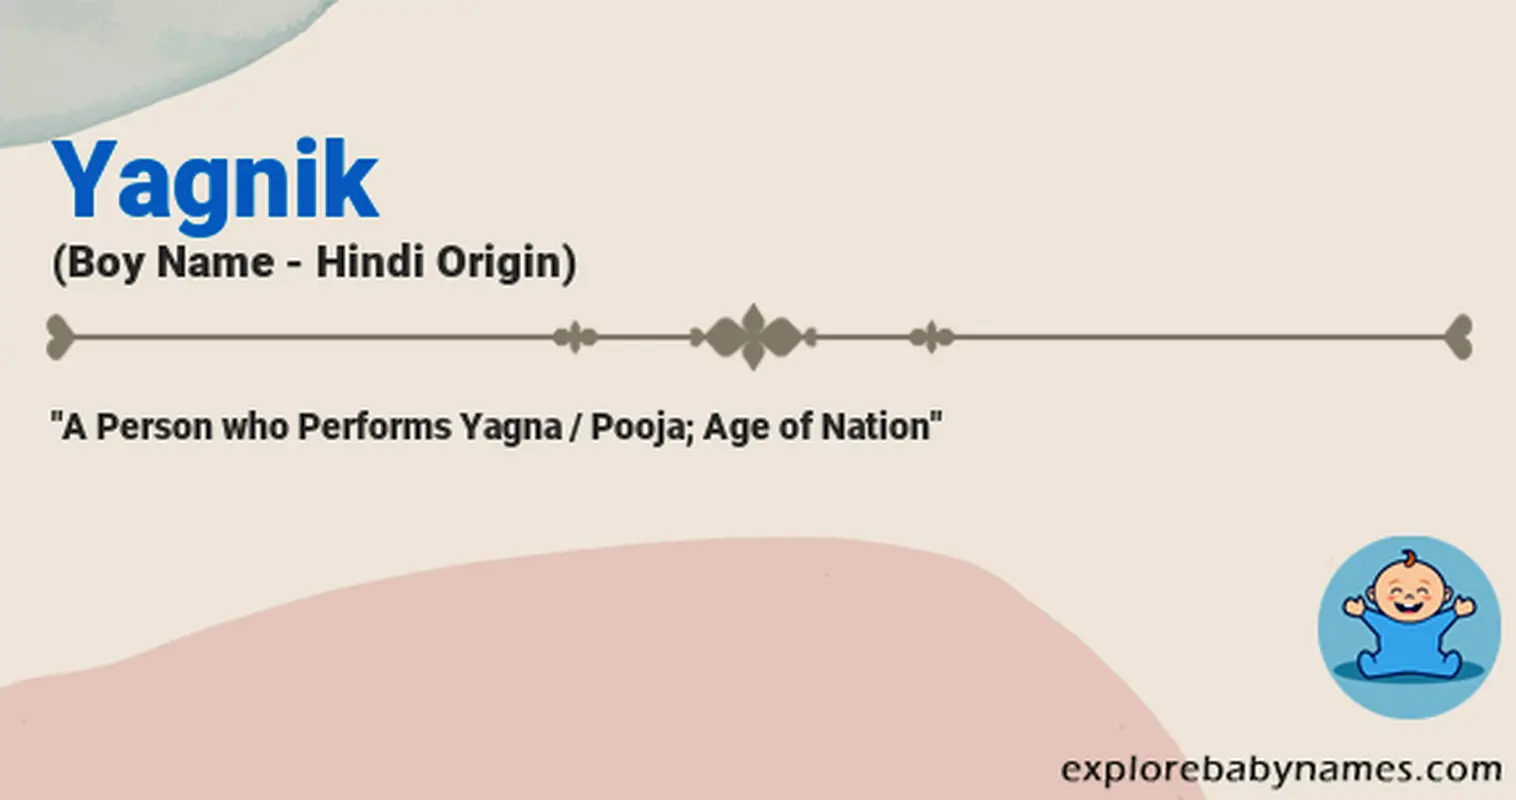 Meaning of Yagnik